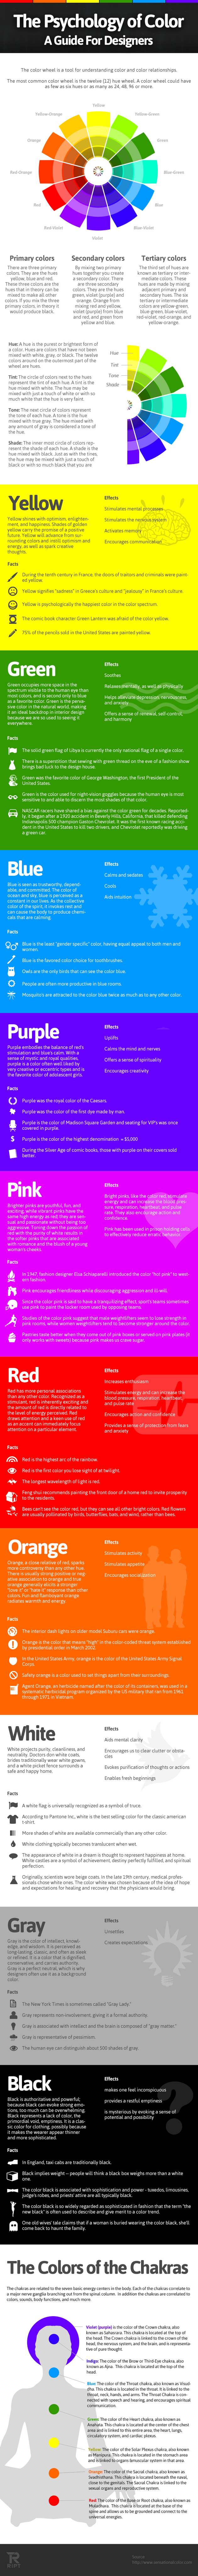 A Color Guide For Designers